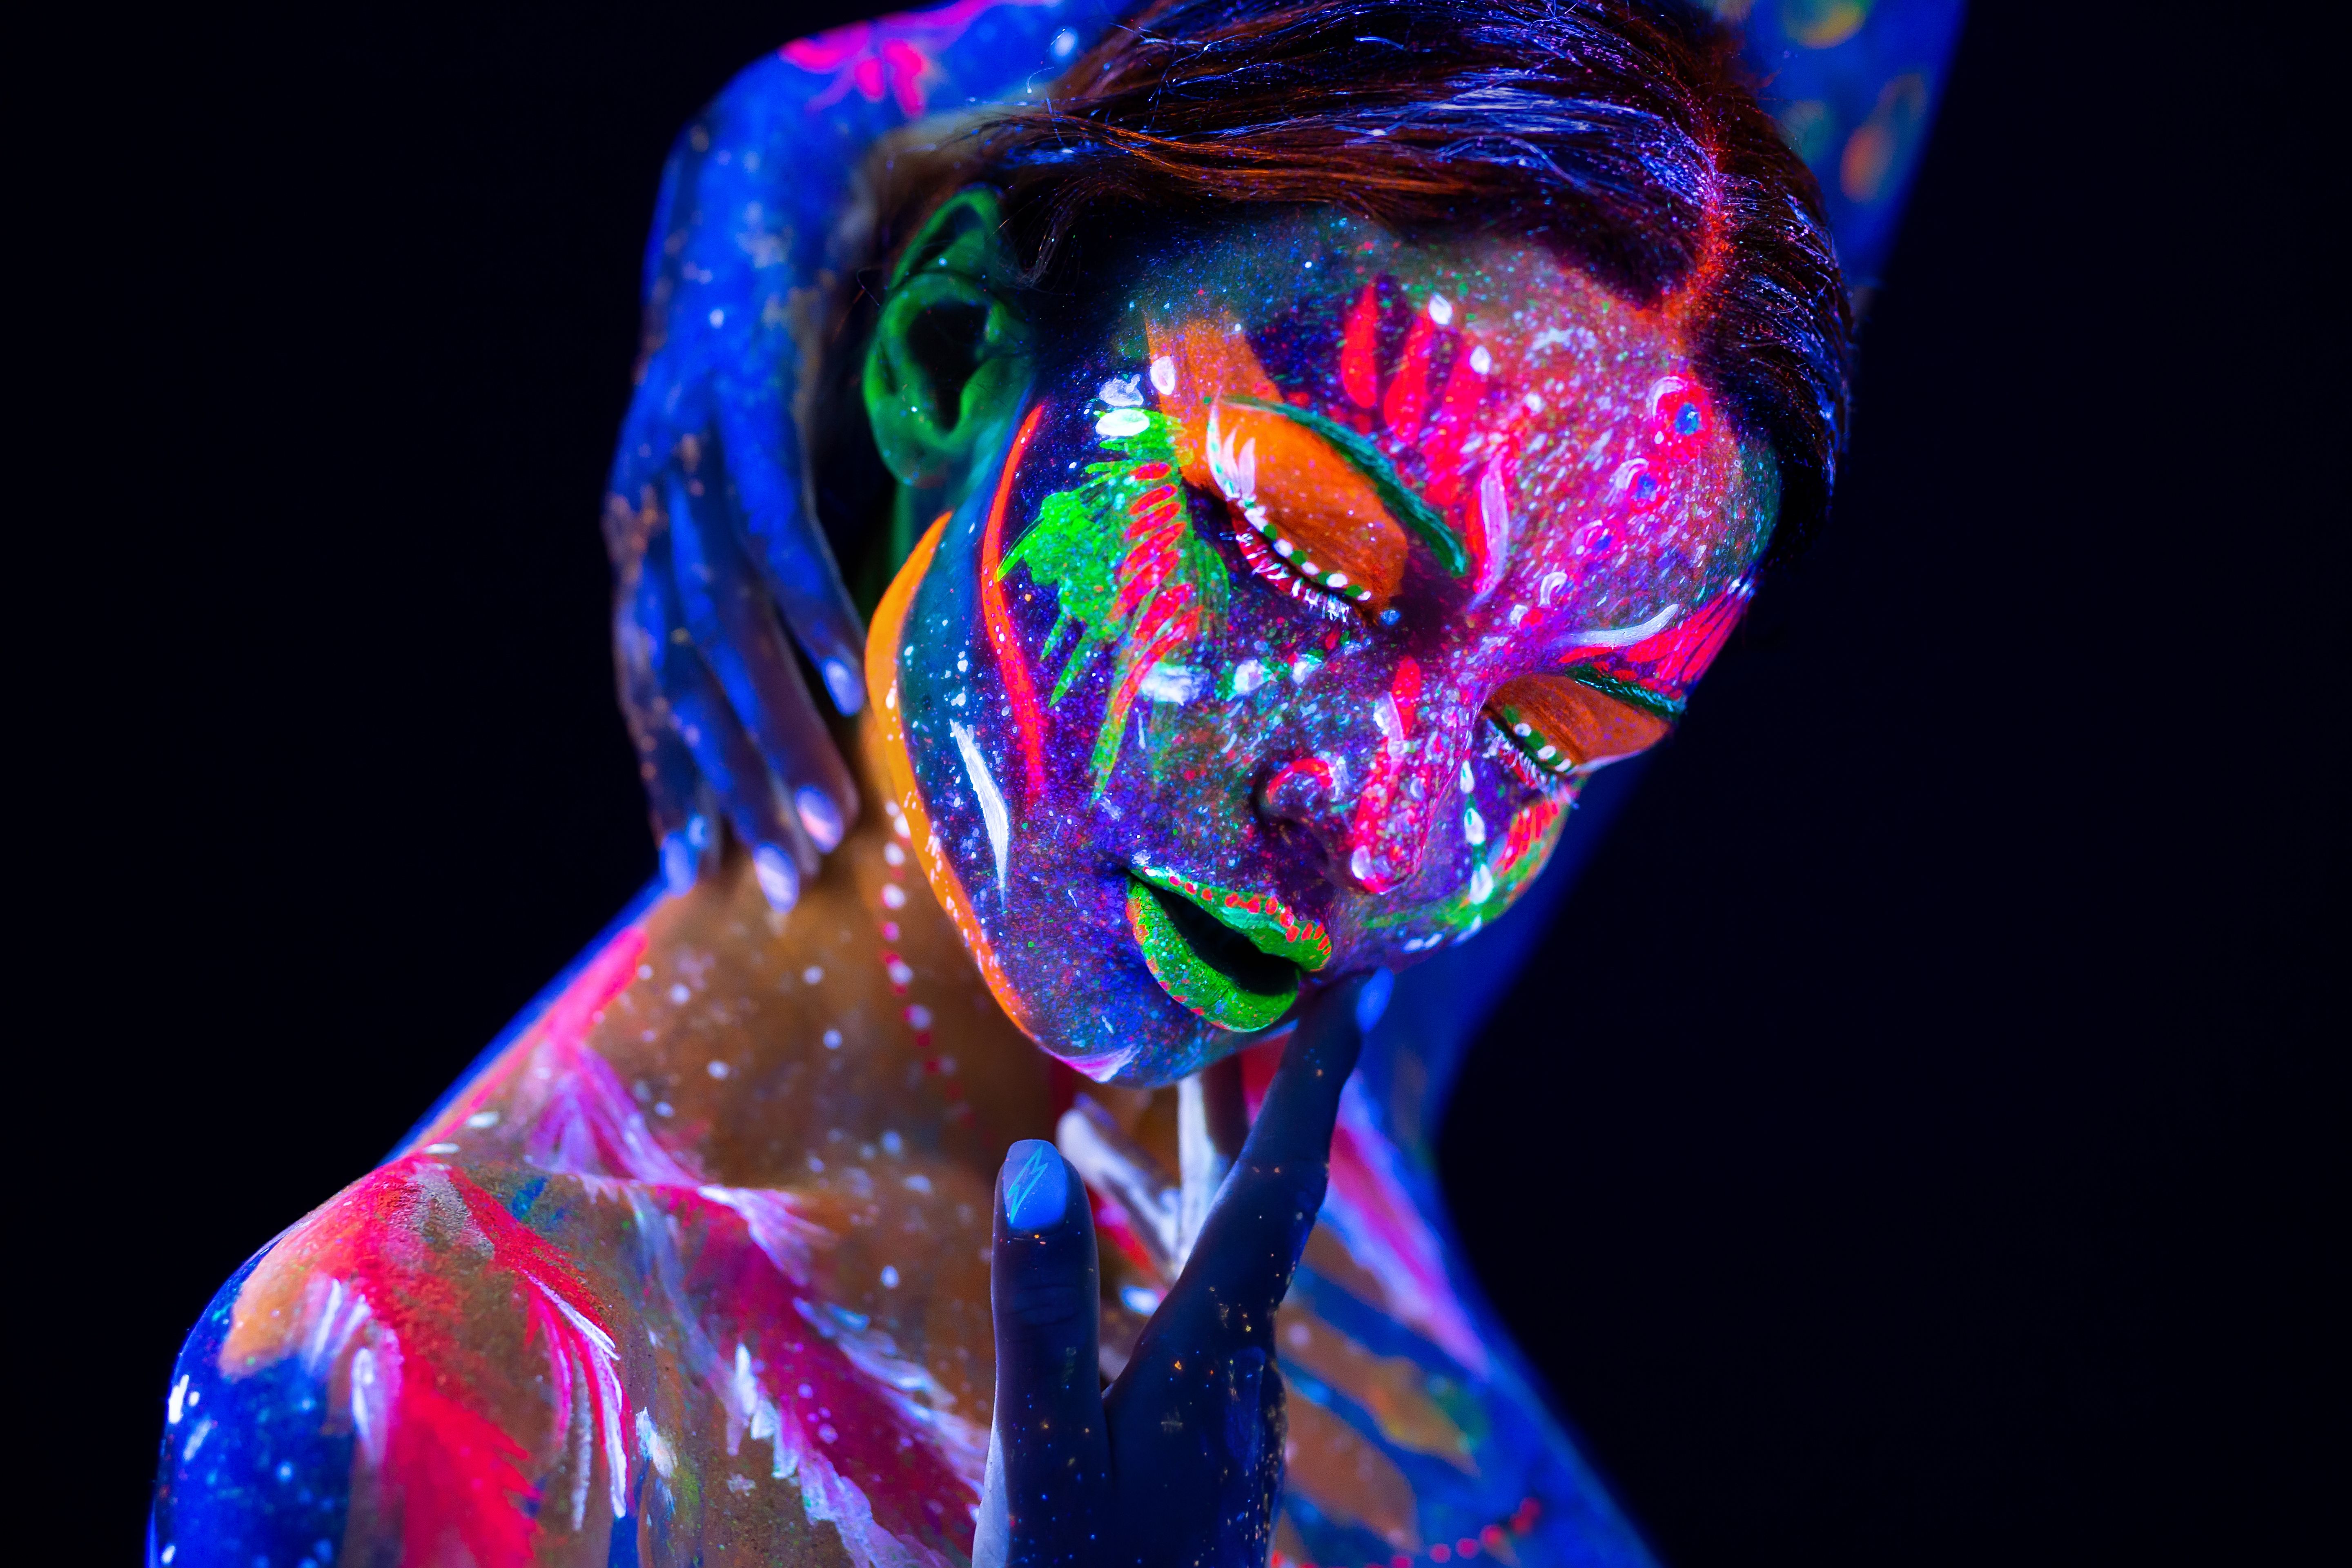 What is body painting?